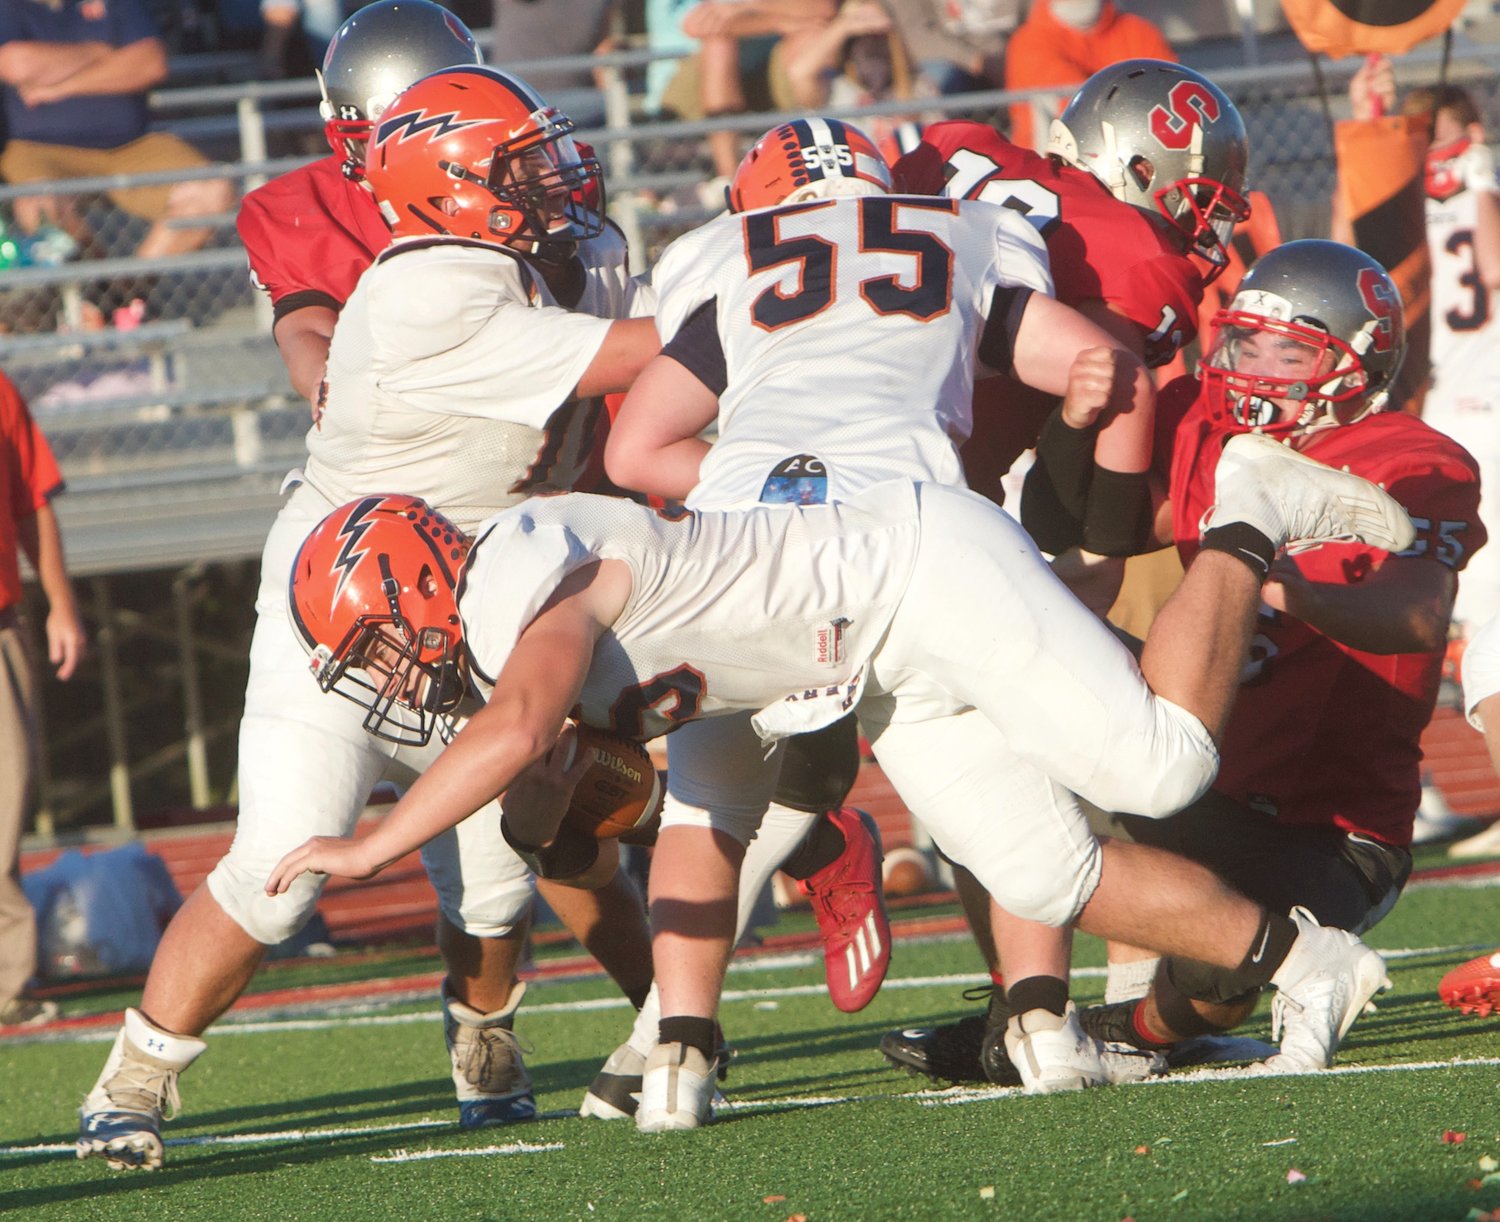 North Montgomery's Jacob Braun bulldozes ahead for a first down.